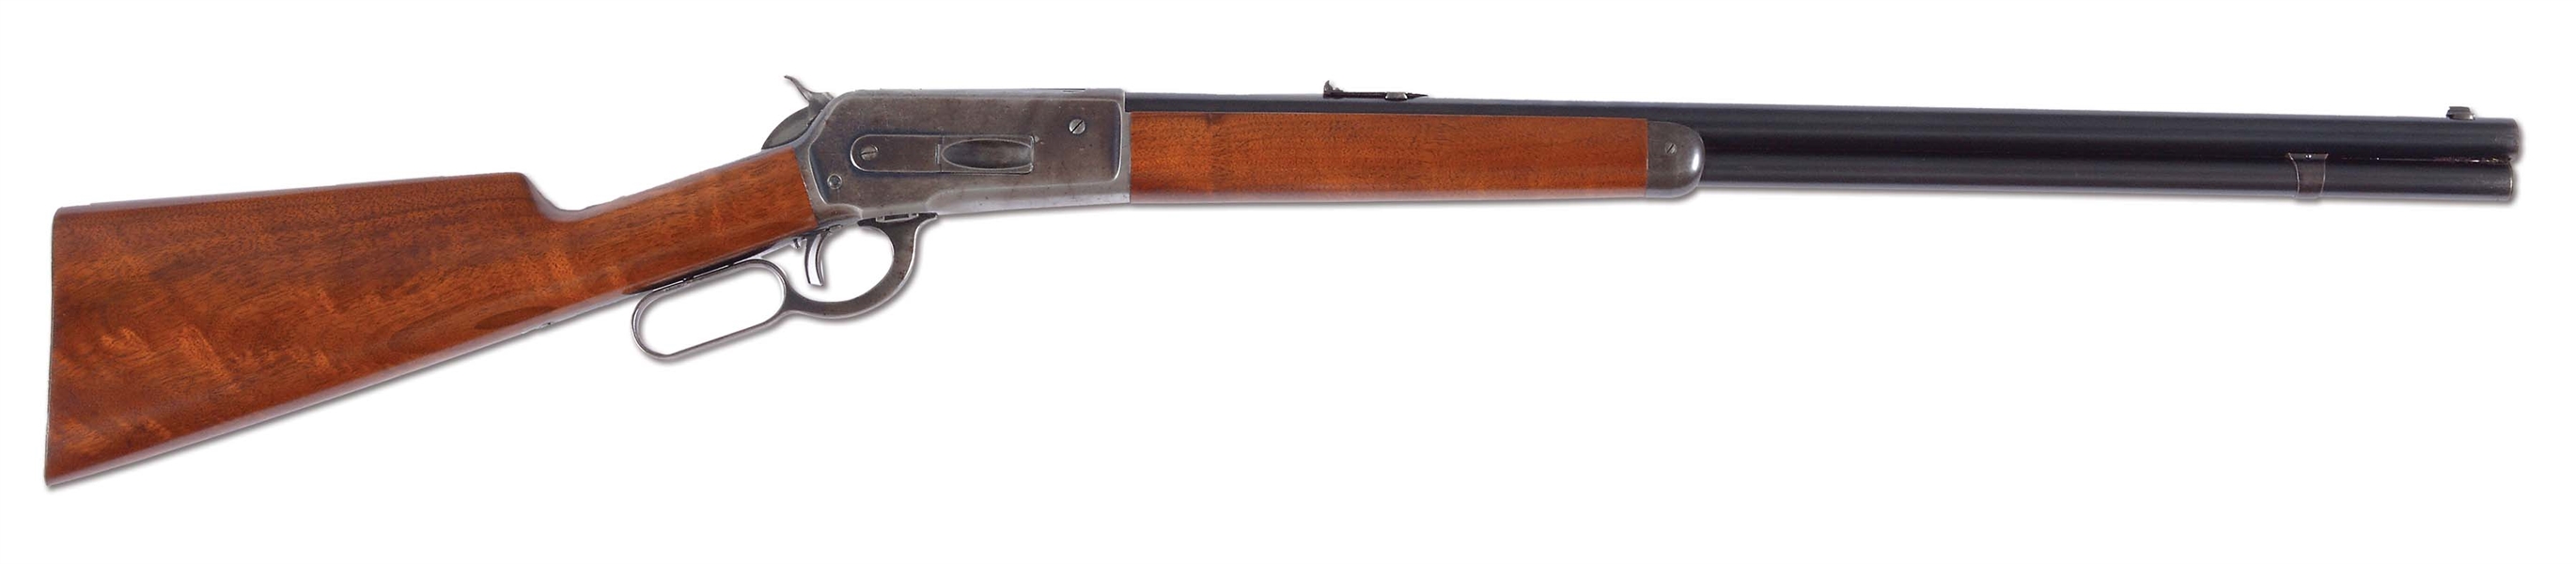 (C) EXCEPTIONALLY RARE DOCUMENTED SMOOTHBORE WINCHESTER 1886 RIFLE, CALIBER 45-90.